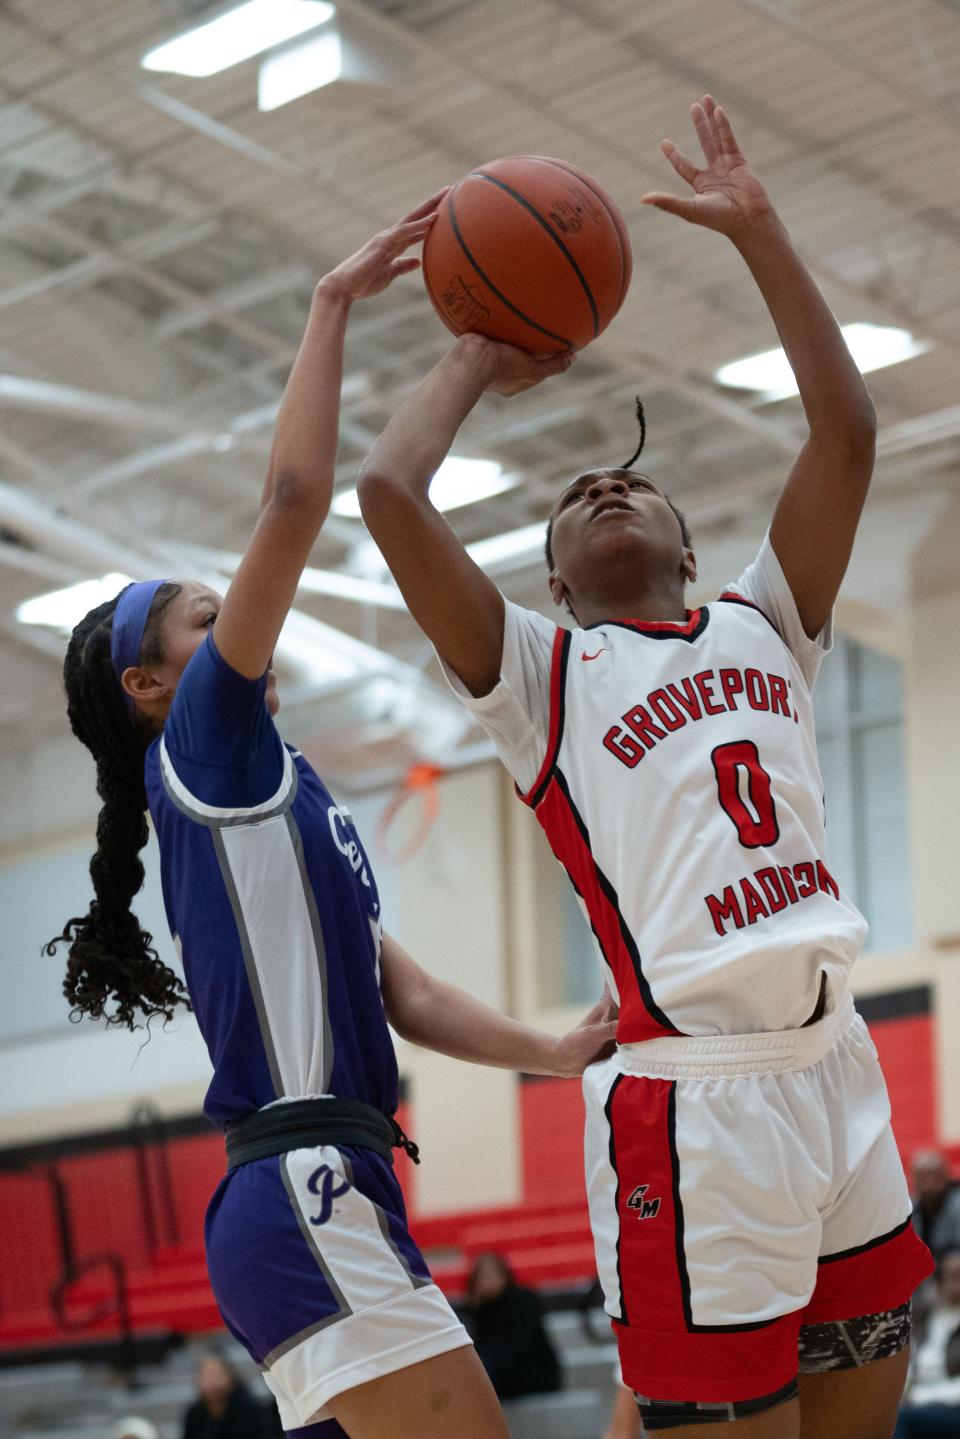 Pickerington Central's Rylee Bess contests a layup attempt by Groveport's Aubriona Benjamin on Friday.